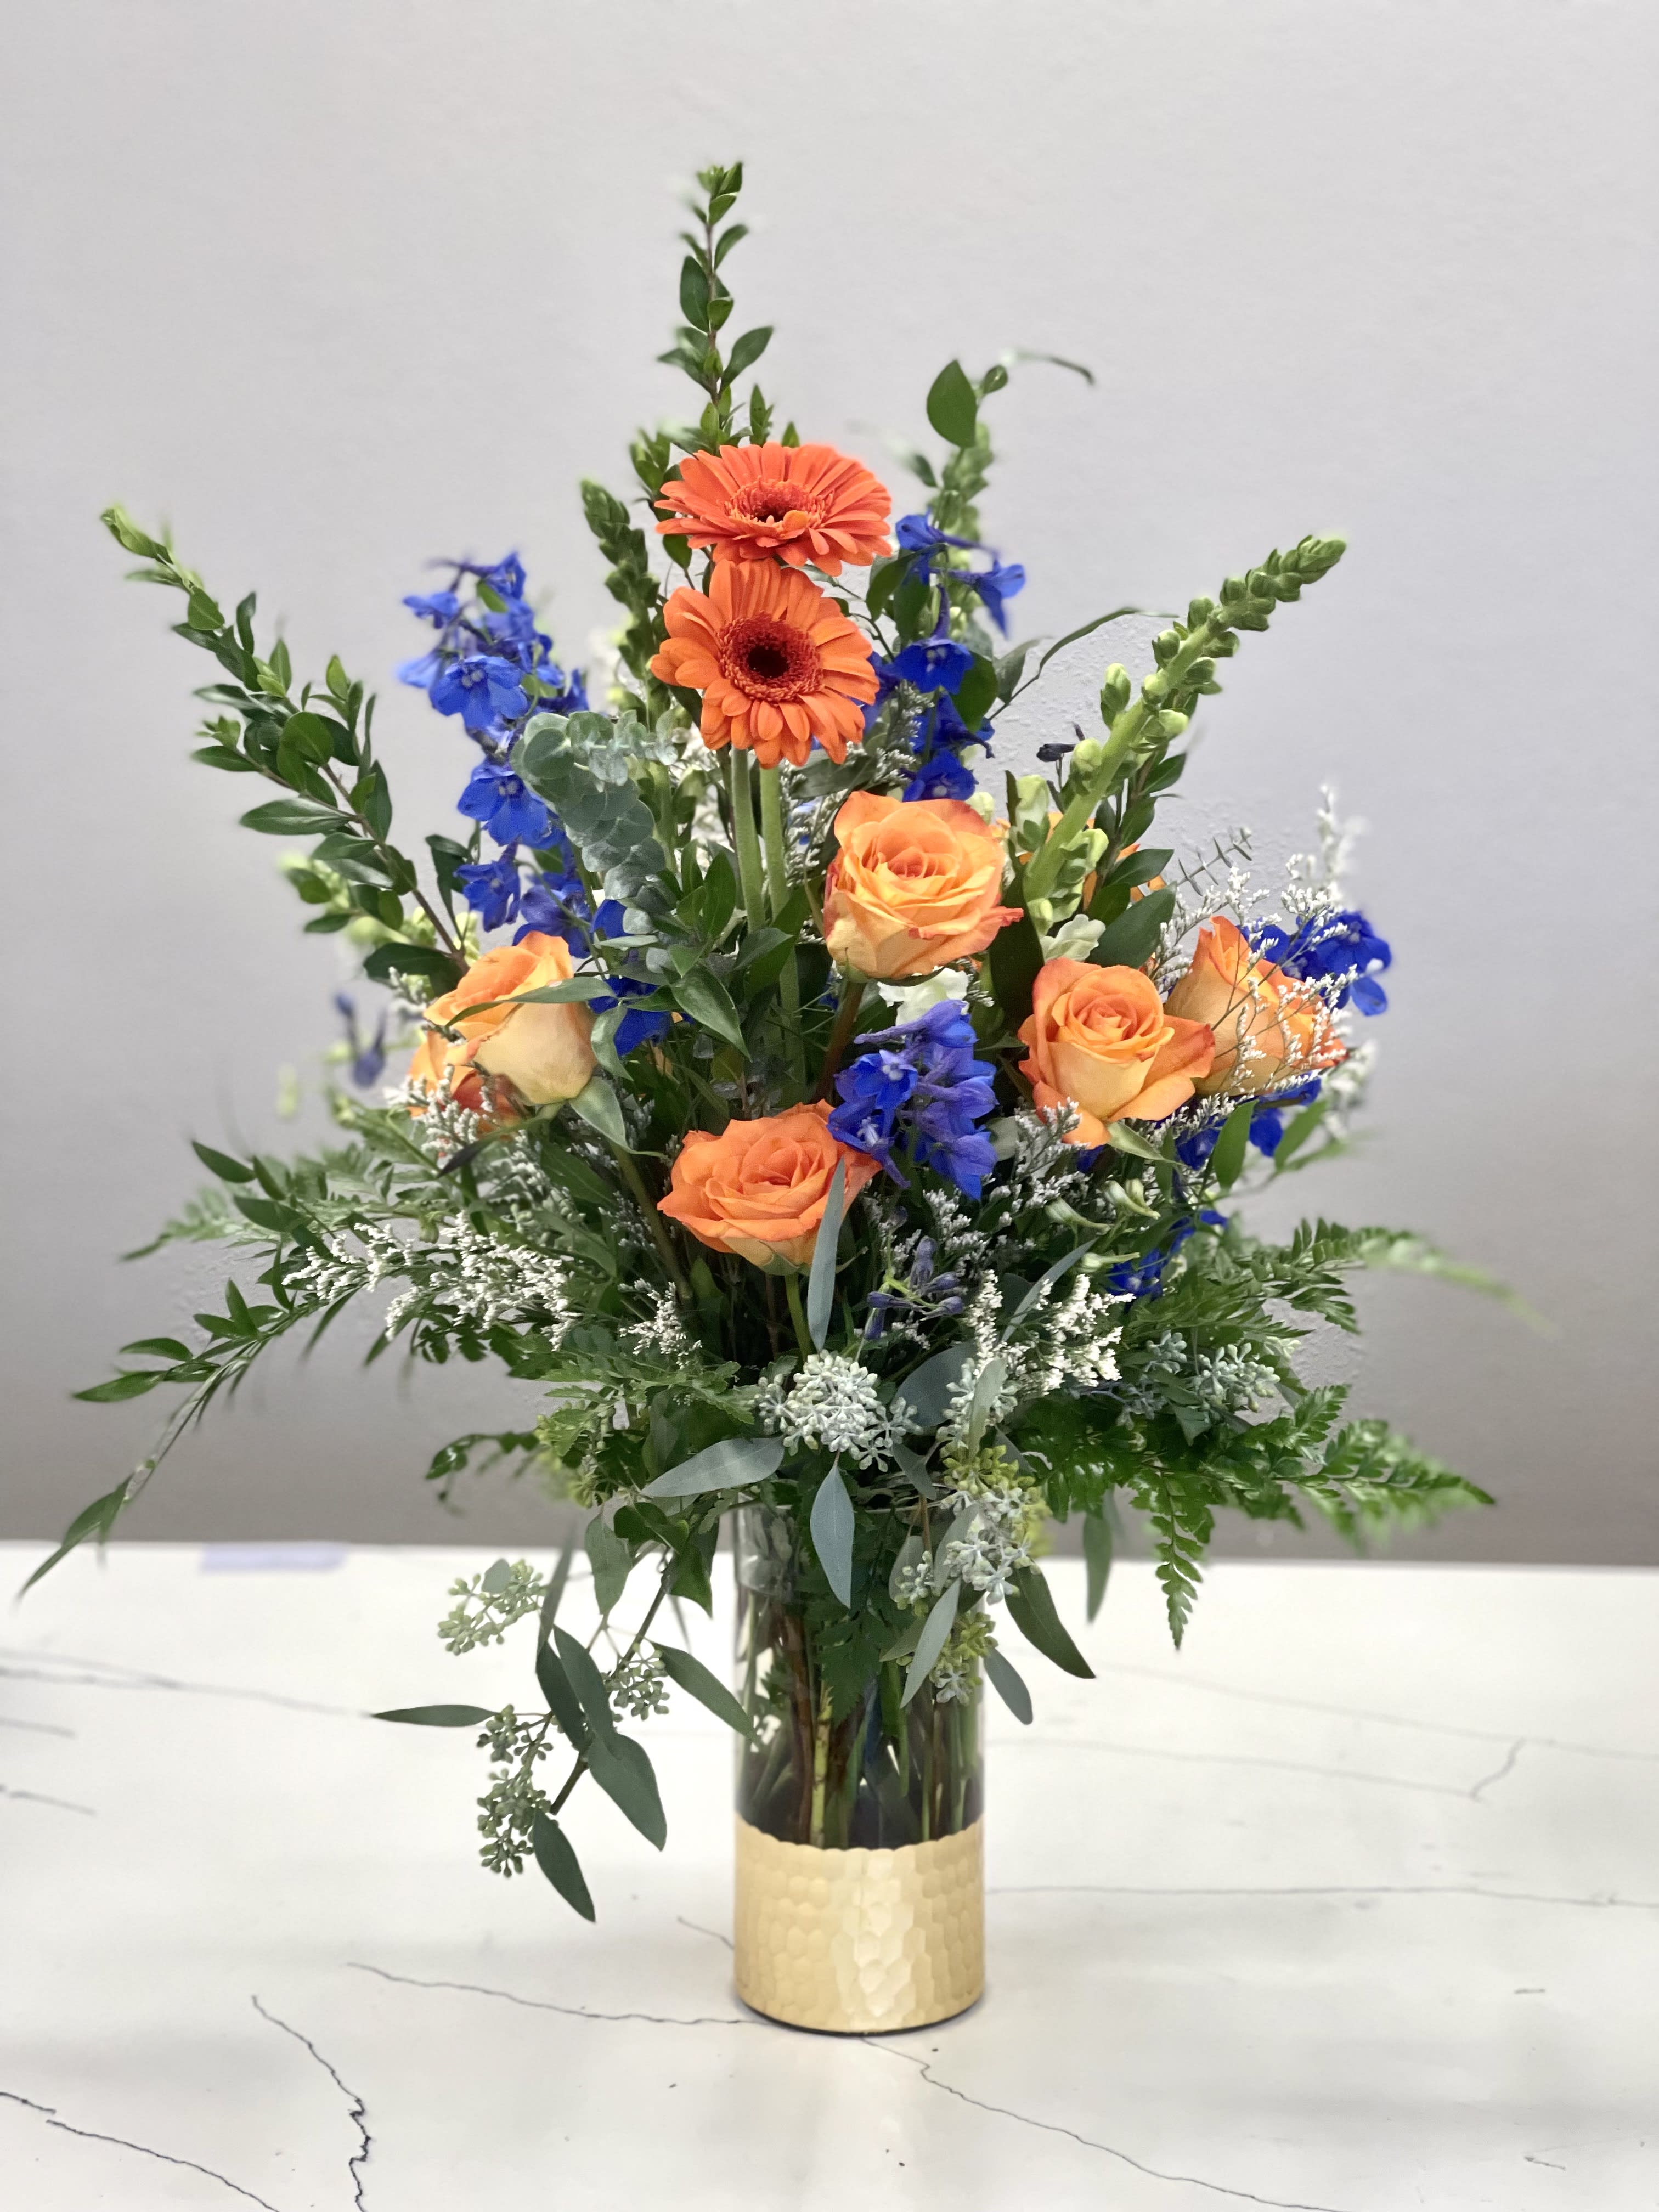 A new day - Flowers to put a smile on their face. Let them know that you are thinking of therewith this tall collection of roses and foliage.